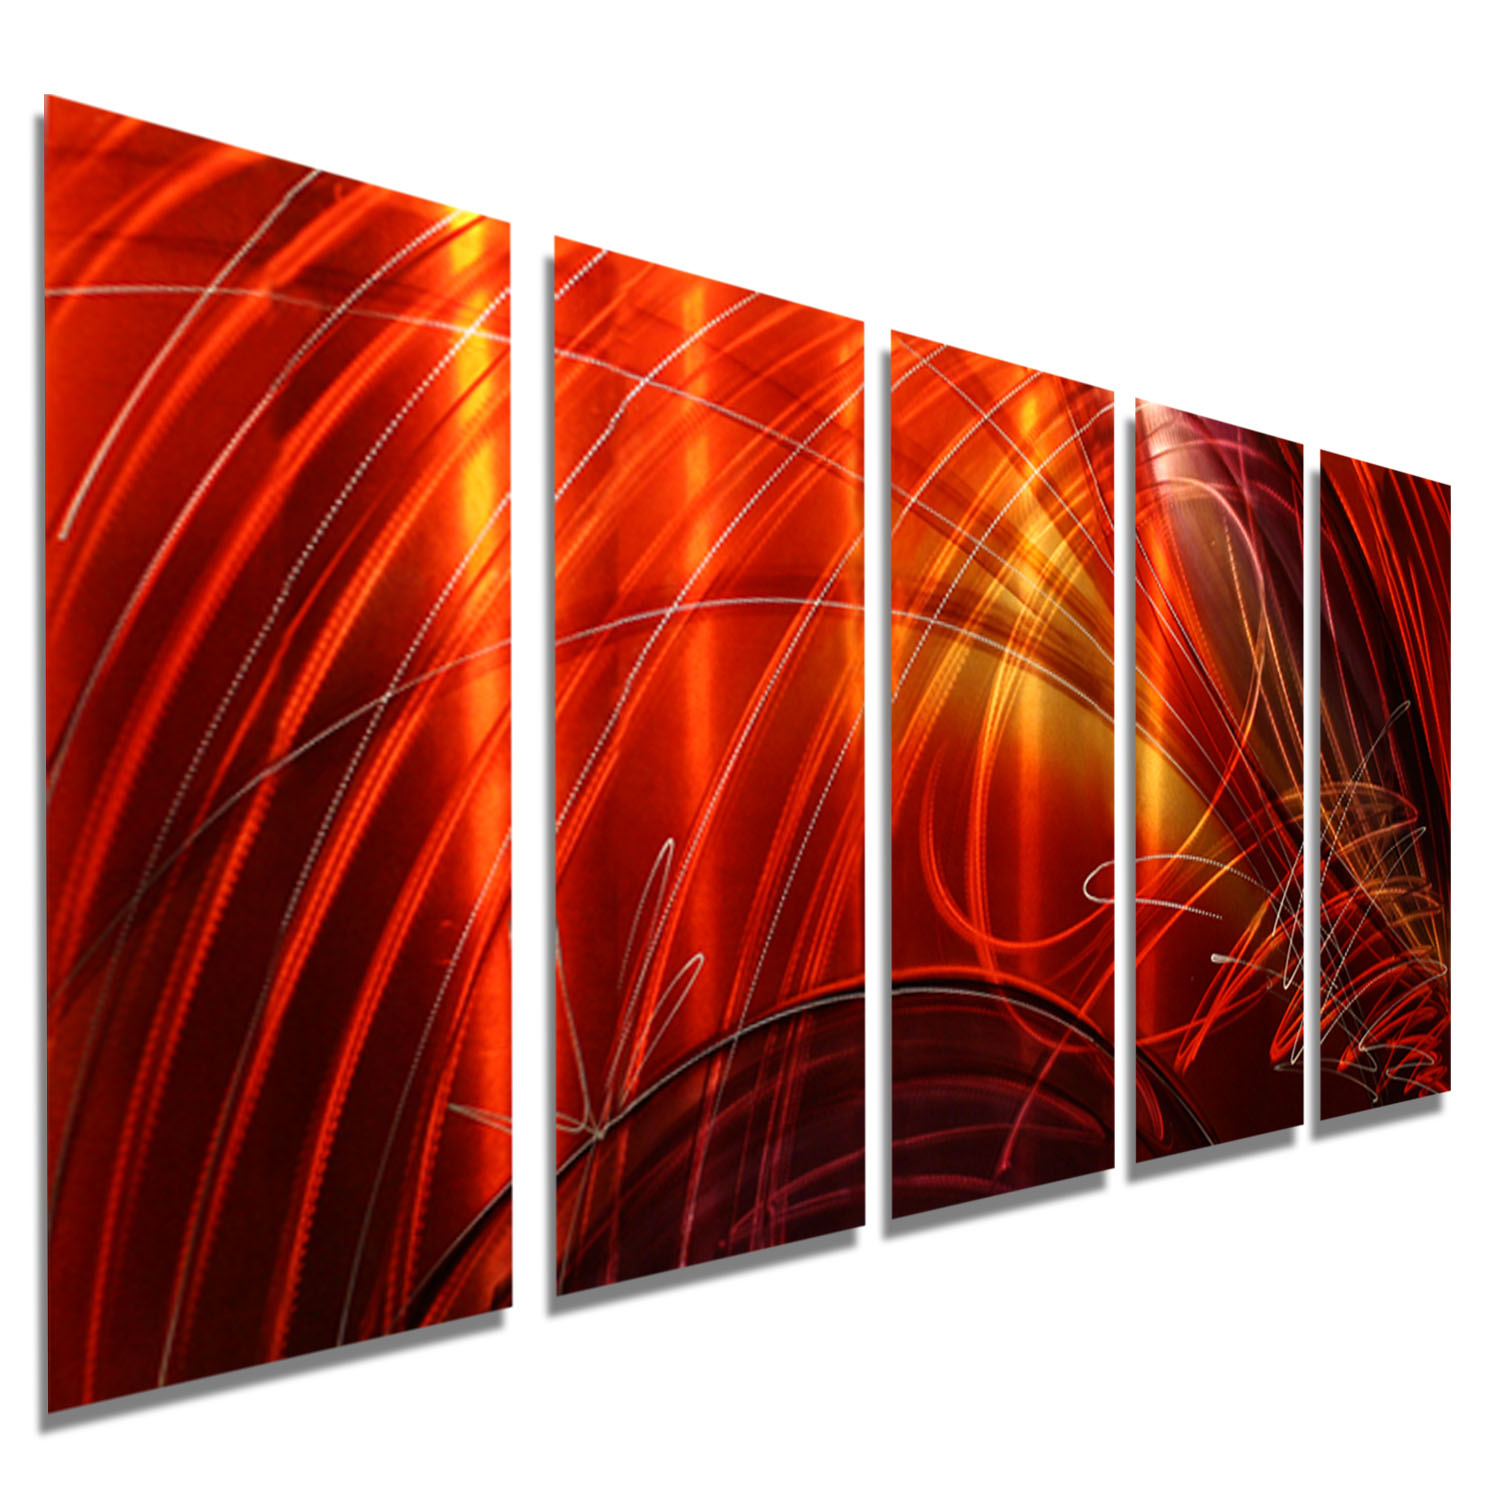 Ruby Sky - Red, Gold and Purple Metal Wall Art - 5 Panel Wall Décor ...